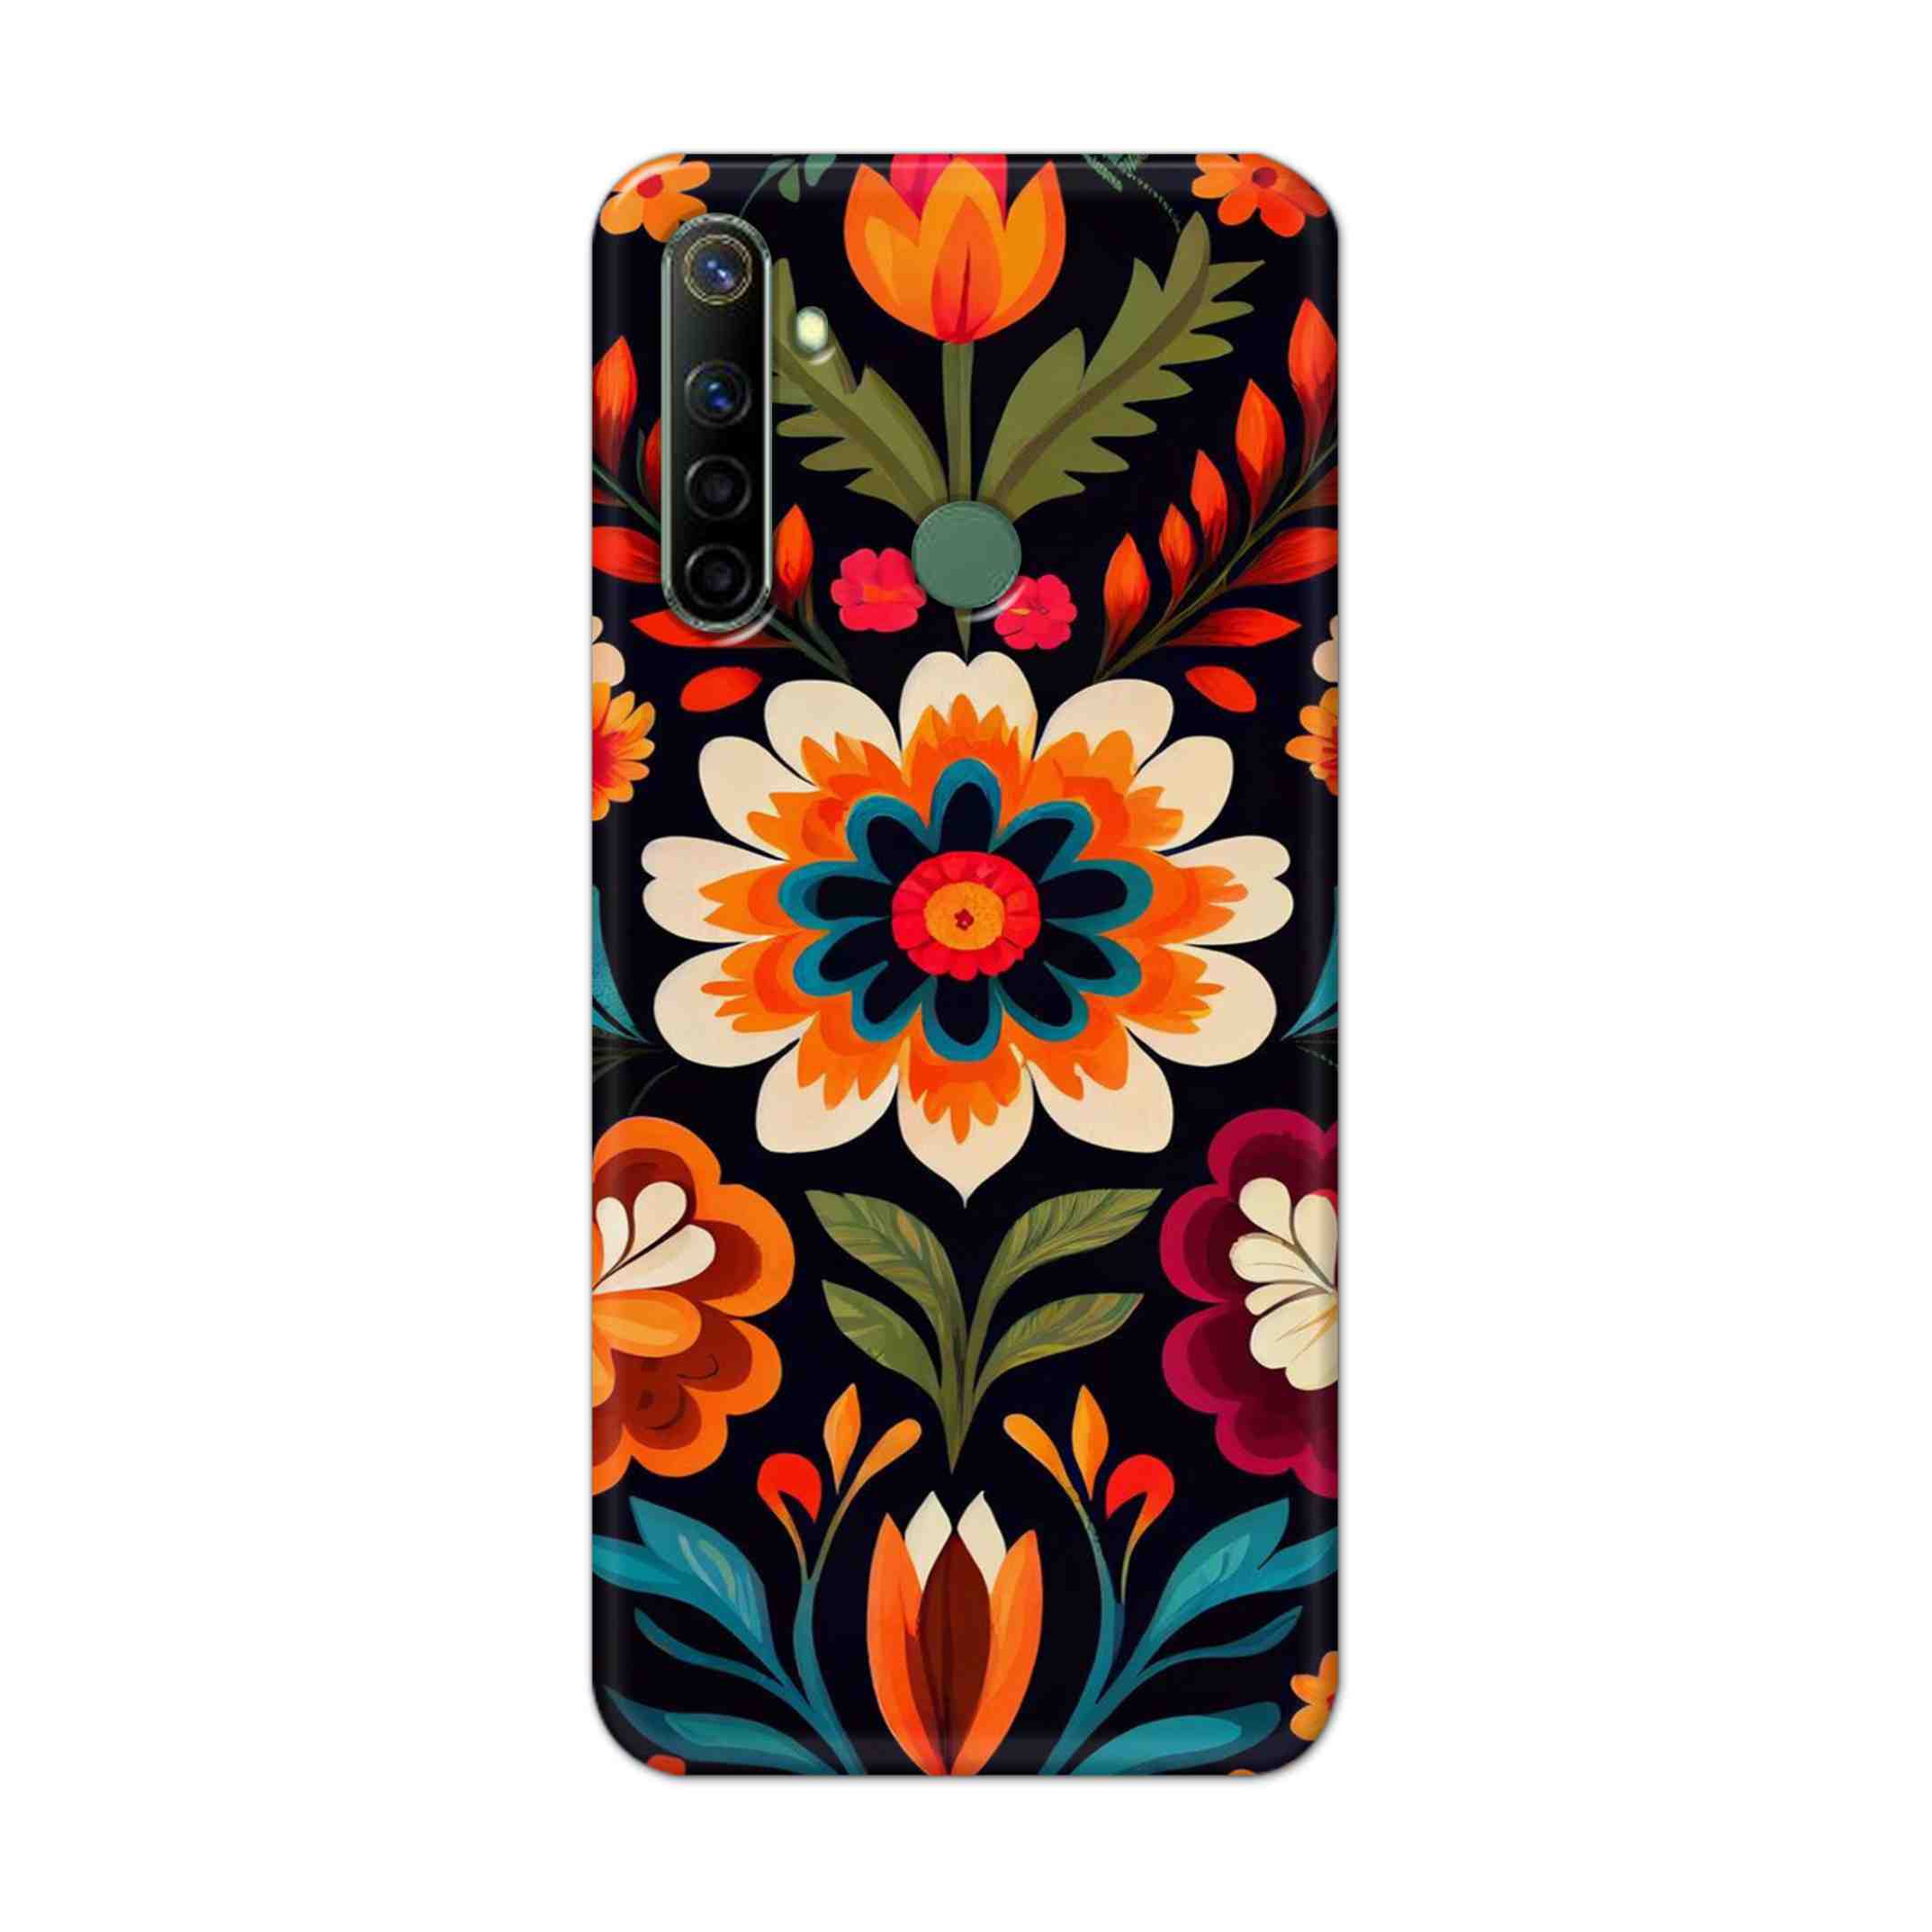 Buy Flower Hard Back Mobile Phone Case Cover For Realme Narzo 10a Online